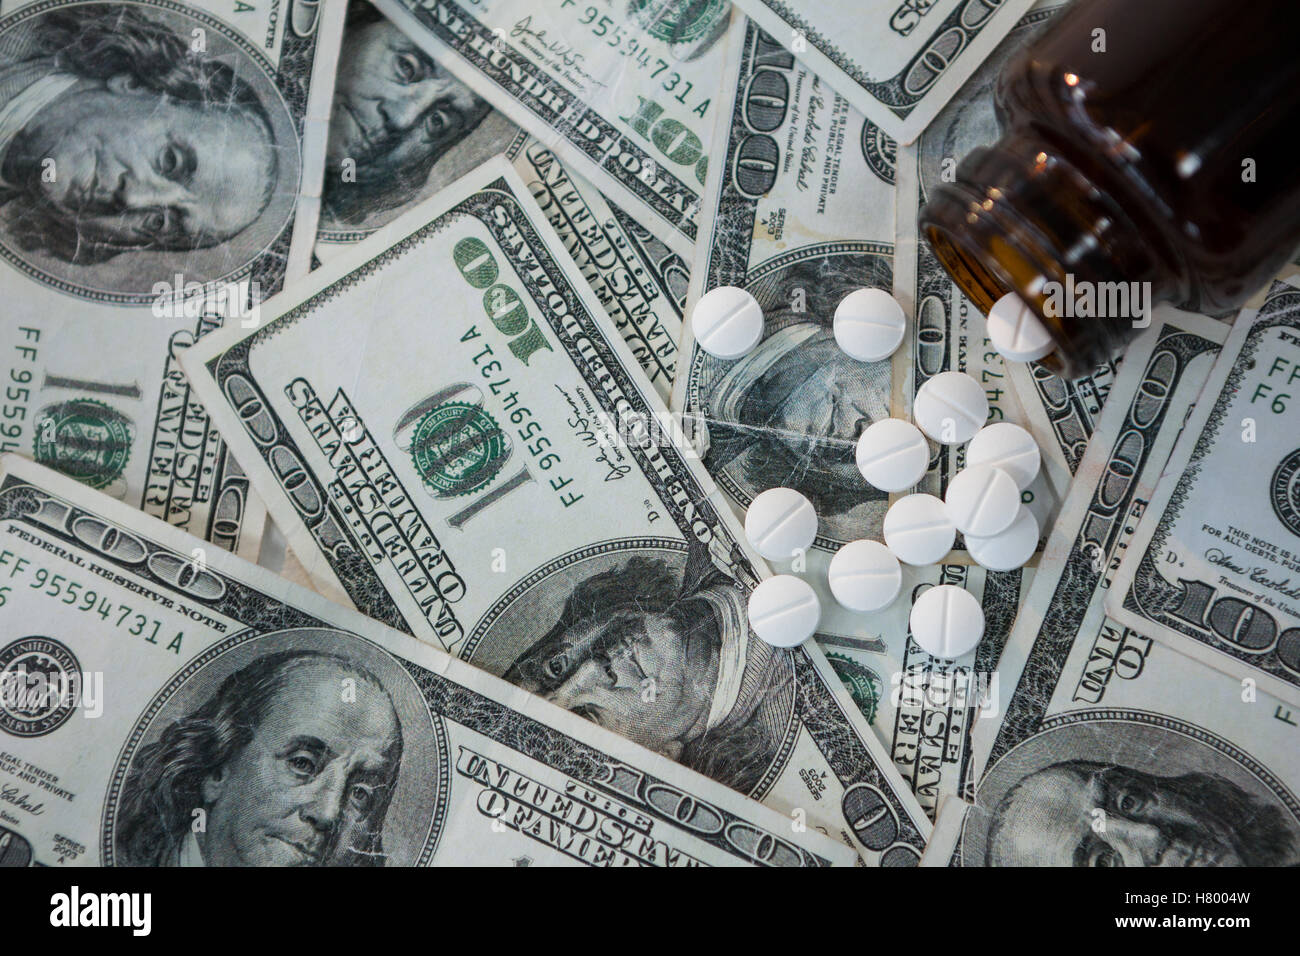 Pills spilling on currency notes Stock Photo